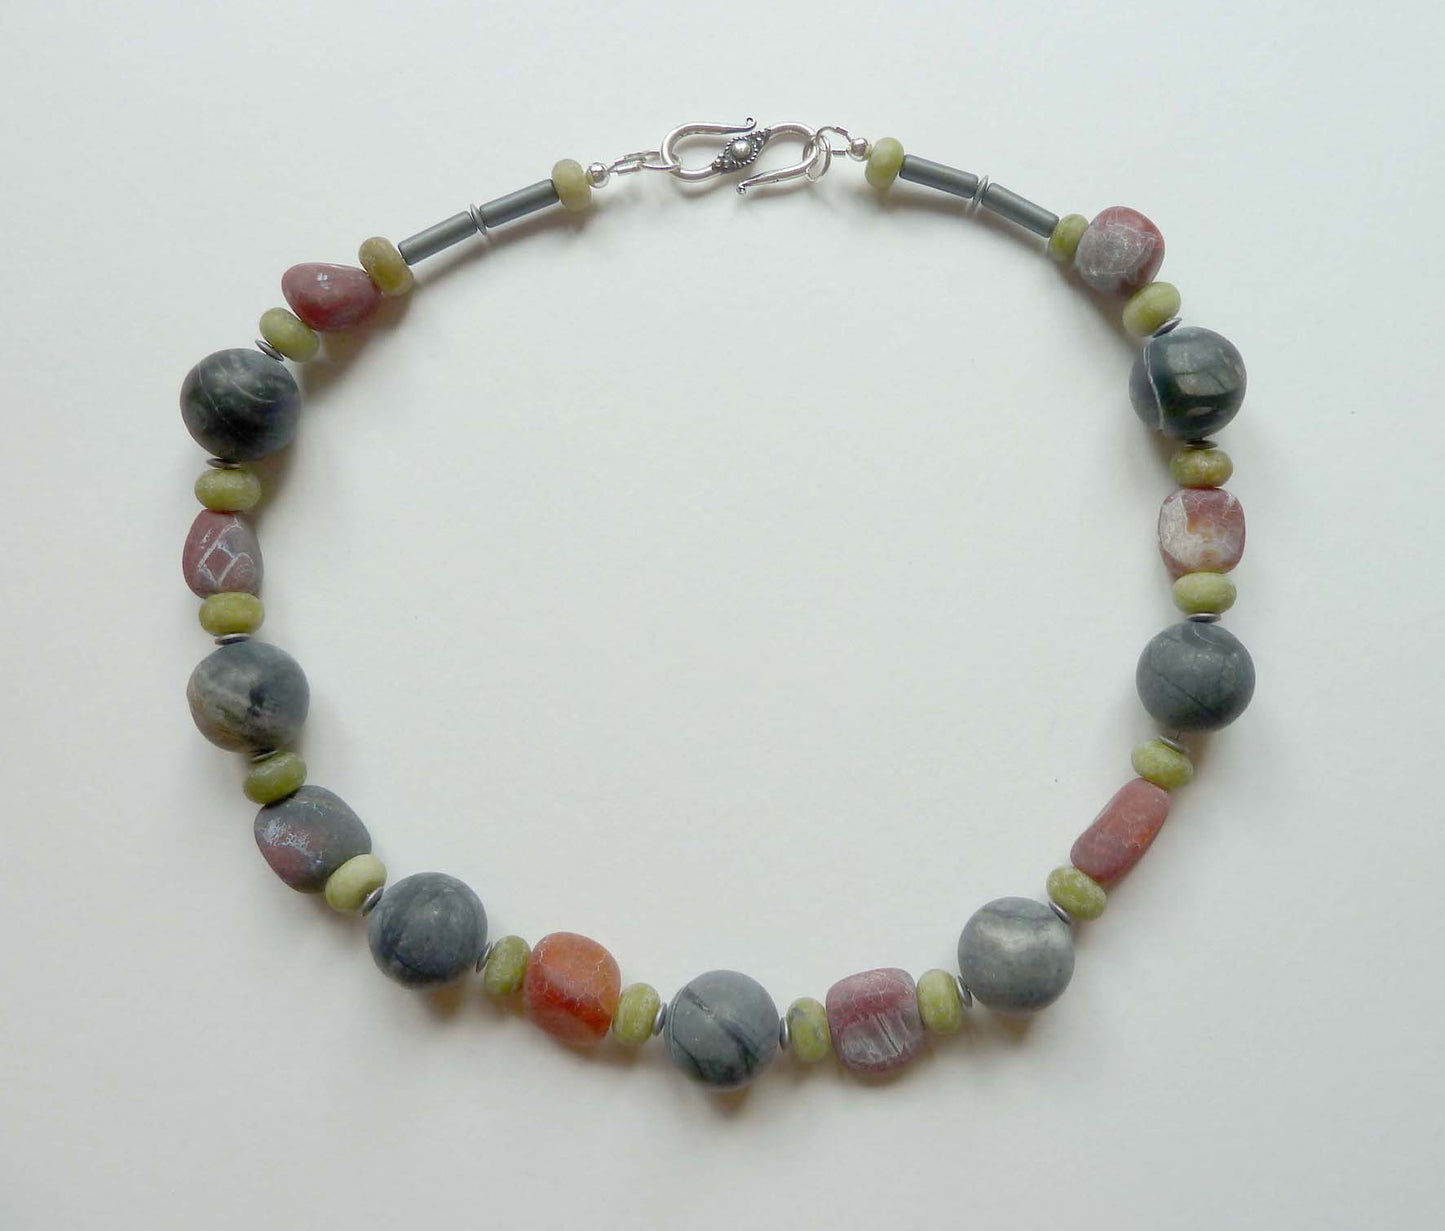 Green opal necklace with haematite and agate